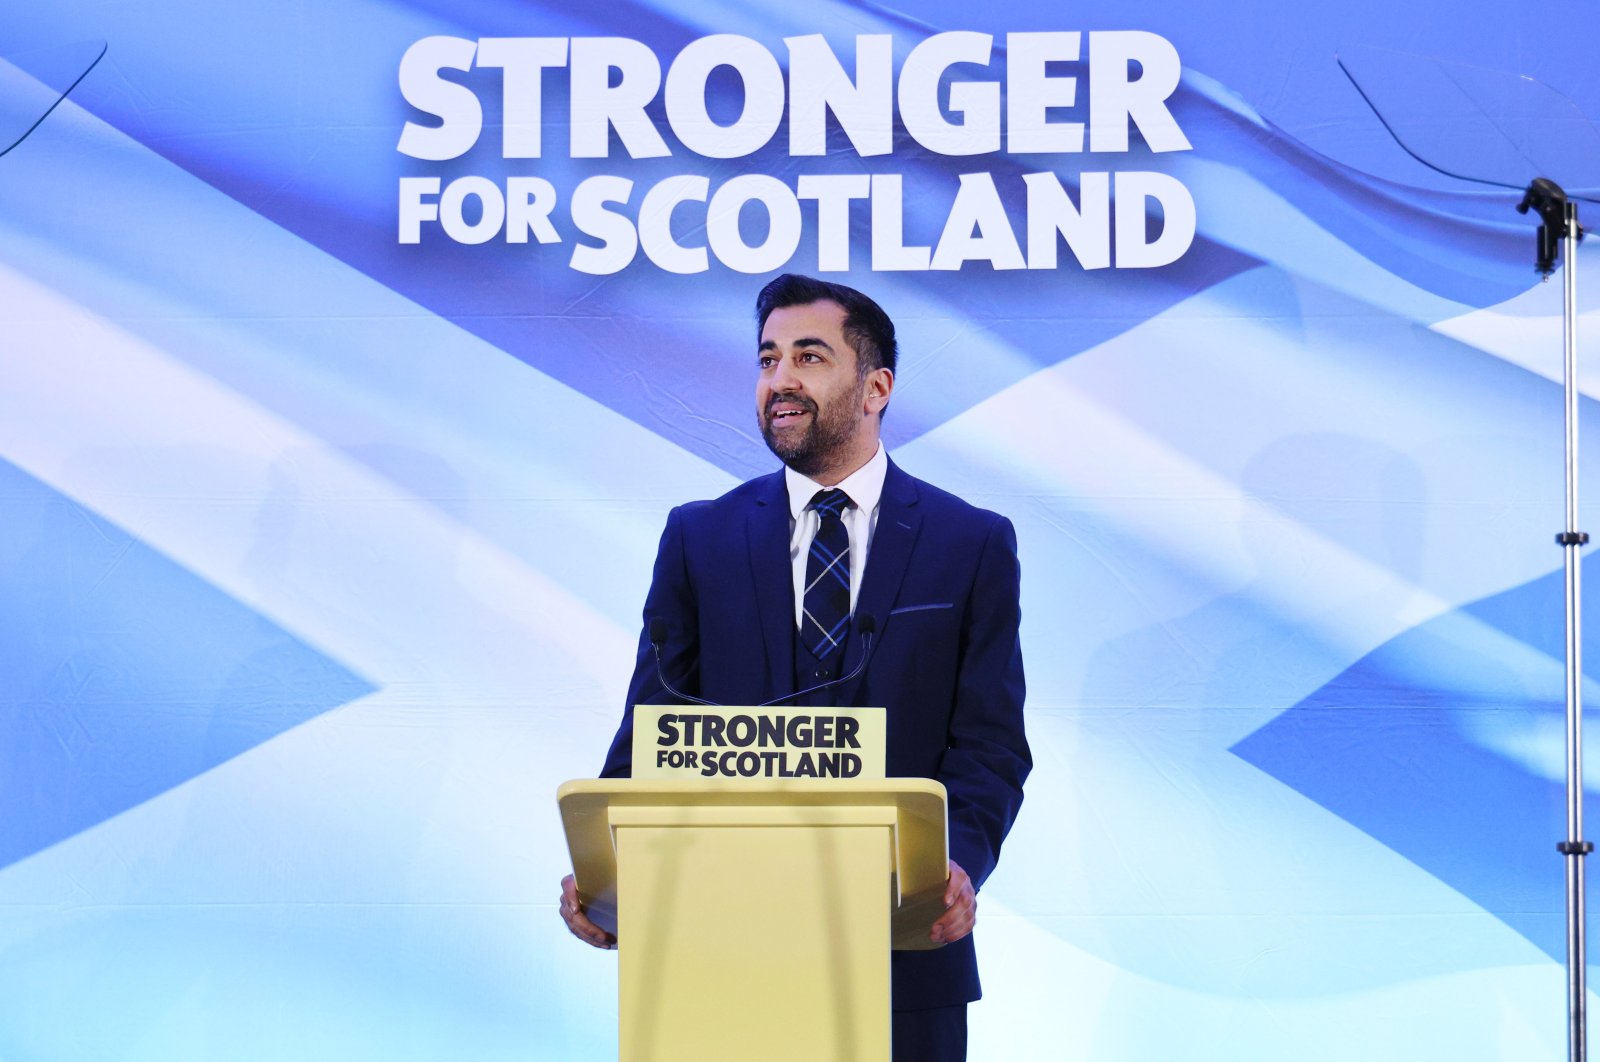 The new leader of the Scottish National Party and former Health Secretary Humza Yousaf speaks after he is announced at Murrayfield Stadium in Edinburgh, Scotland, Britain, March 27, 2023. (EPA Photo)